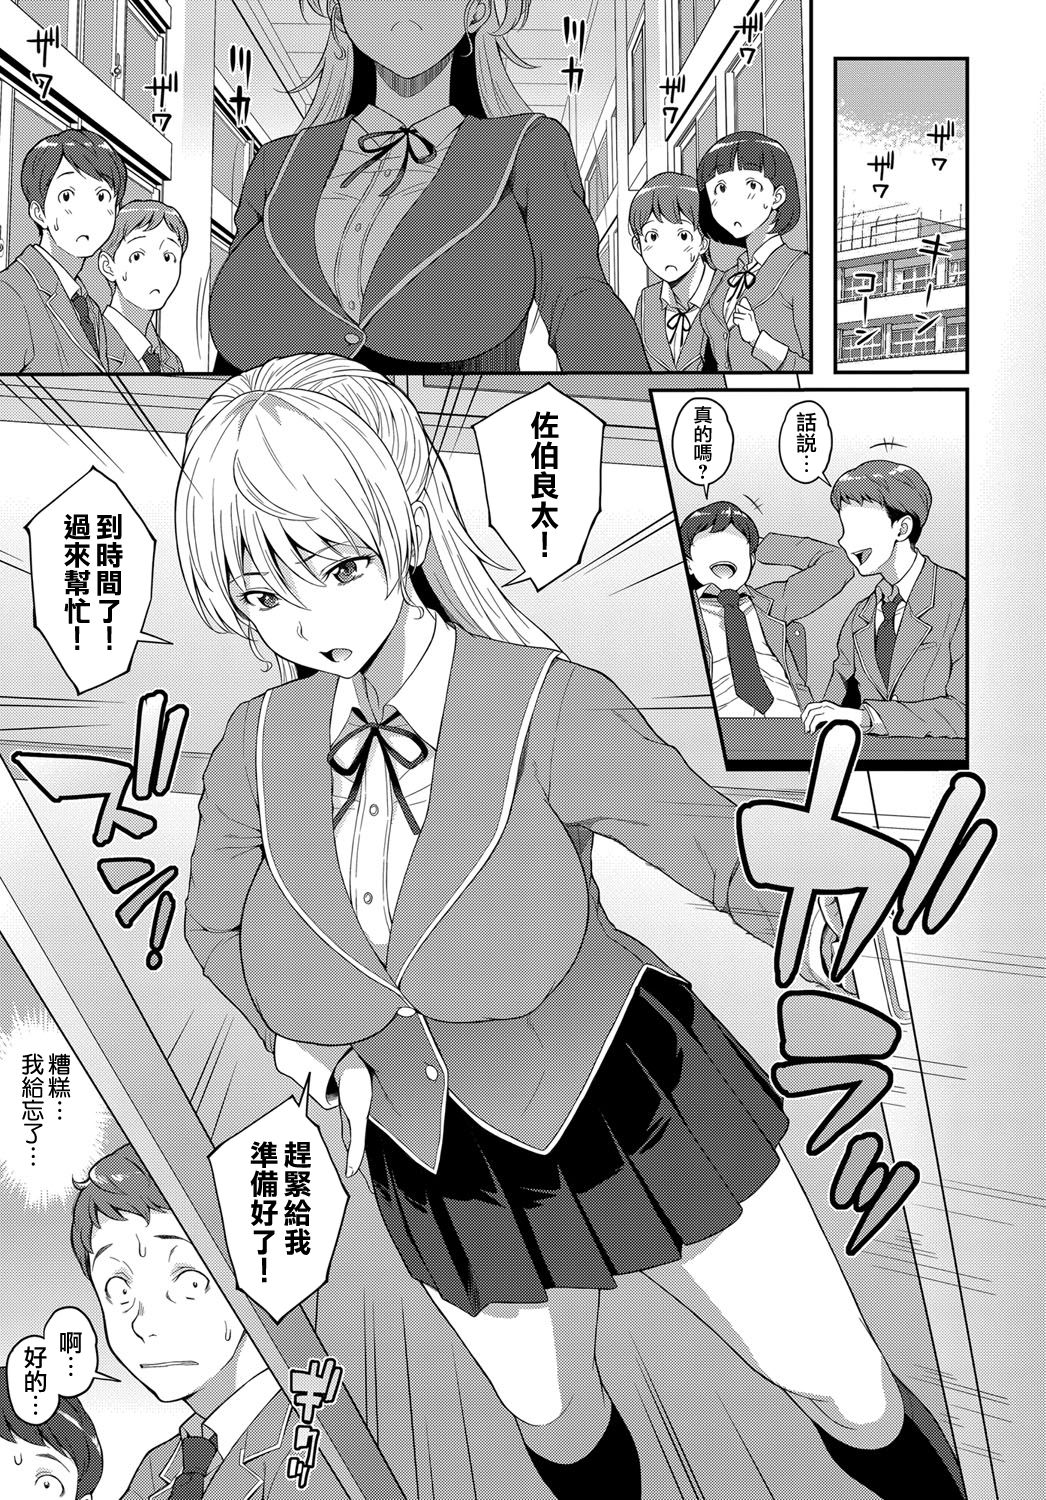 [Kemigawa] Freud no These - Freud's Thesis (COMIC Anthurium 2019-11) [Chinese] [無邪気漢化組] [Digital] page 3 full